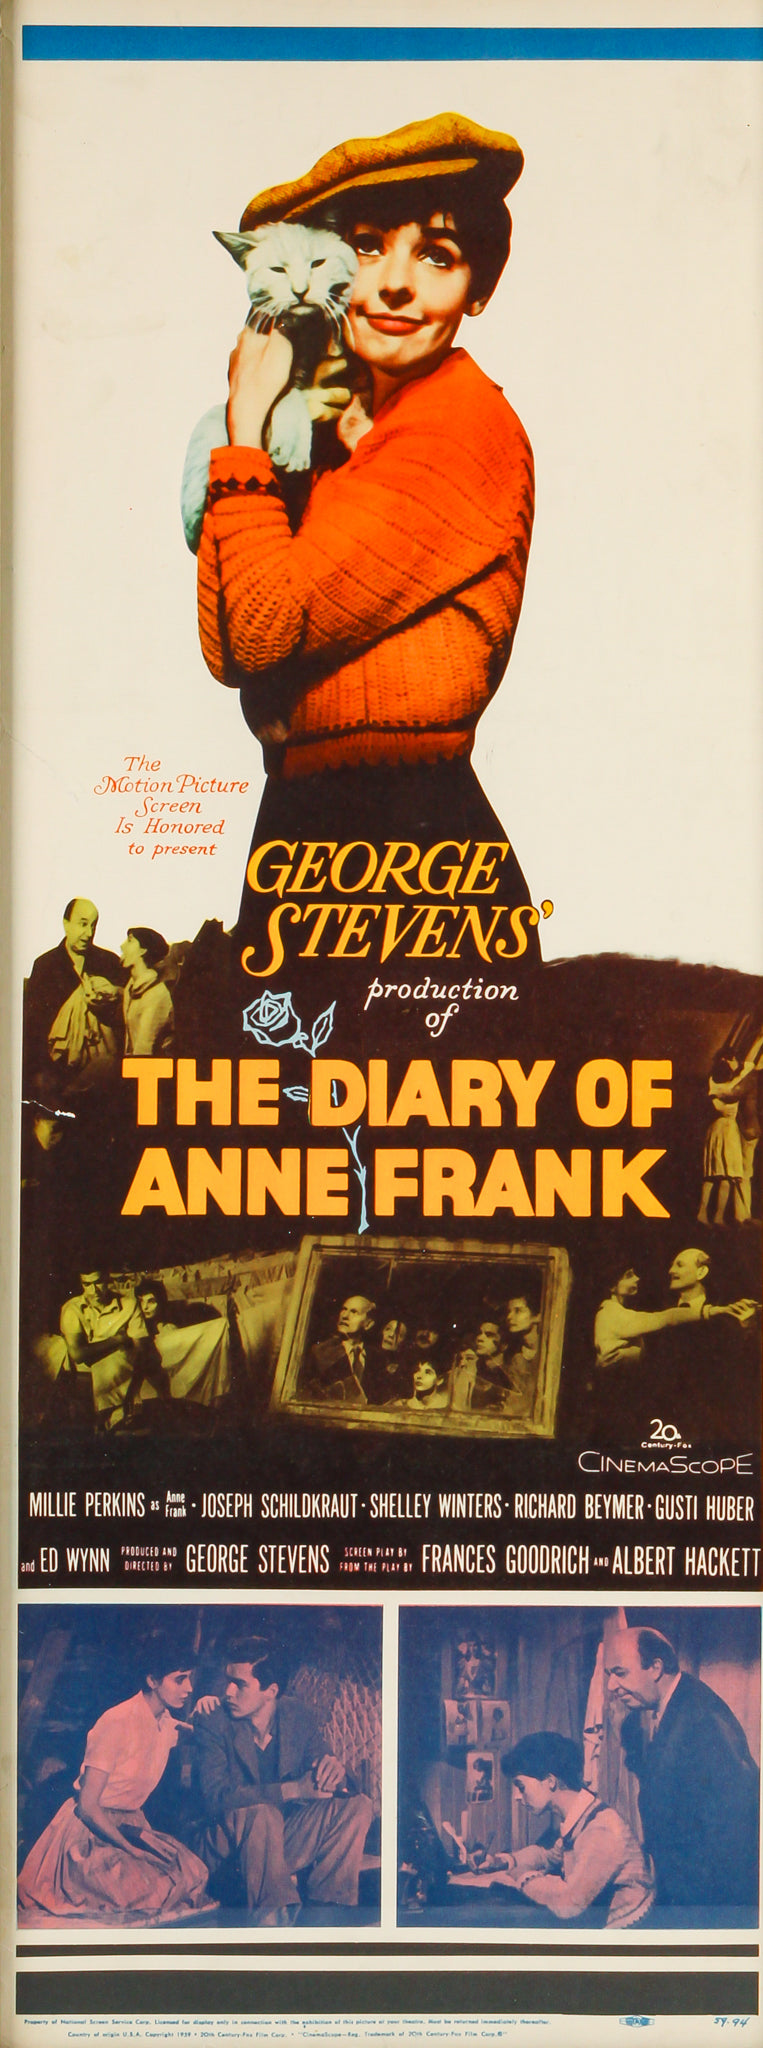 Vintage Movie Poster "The Diary of Anne Frank" - Lithographic Print